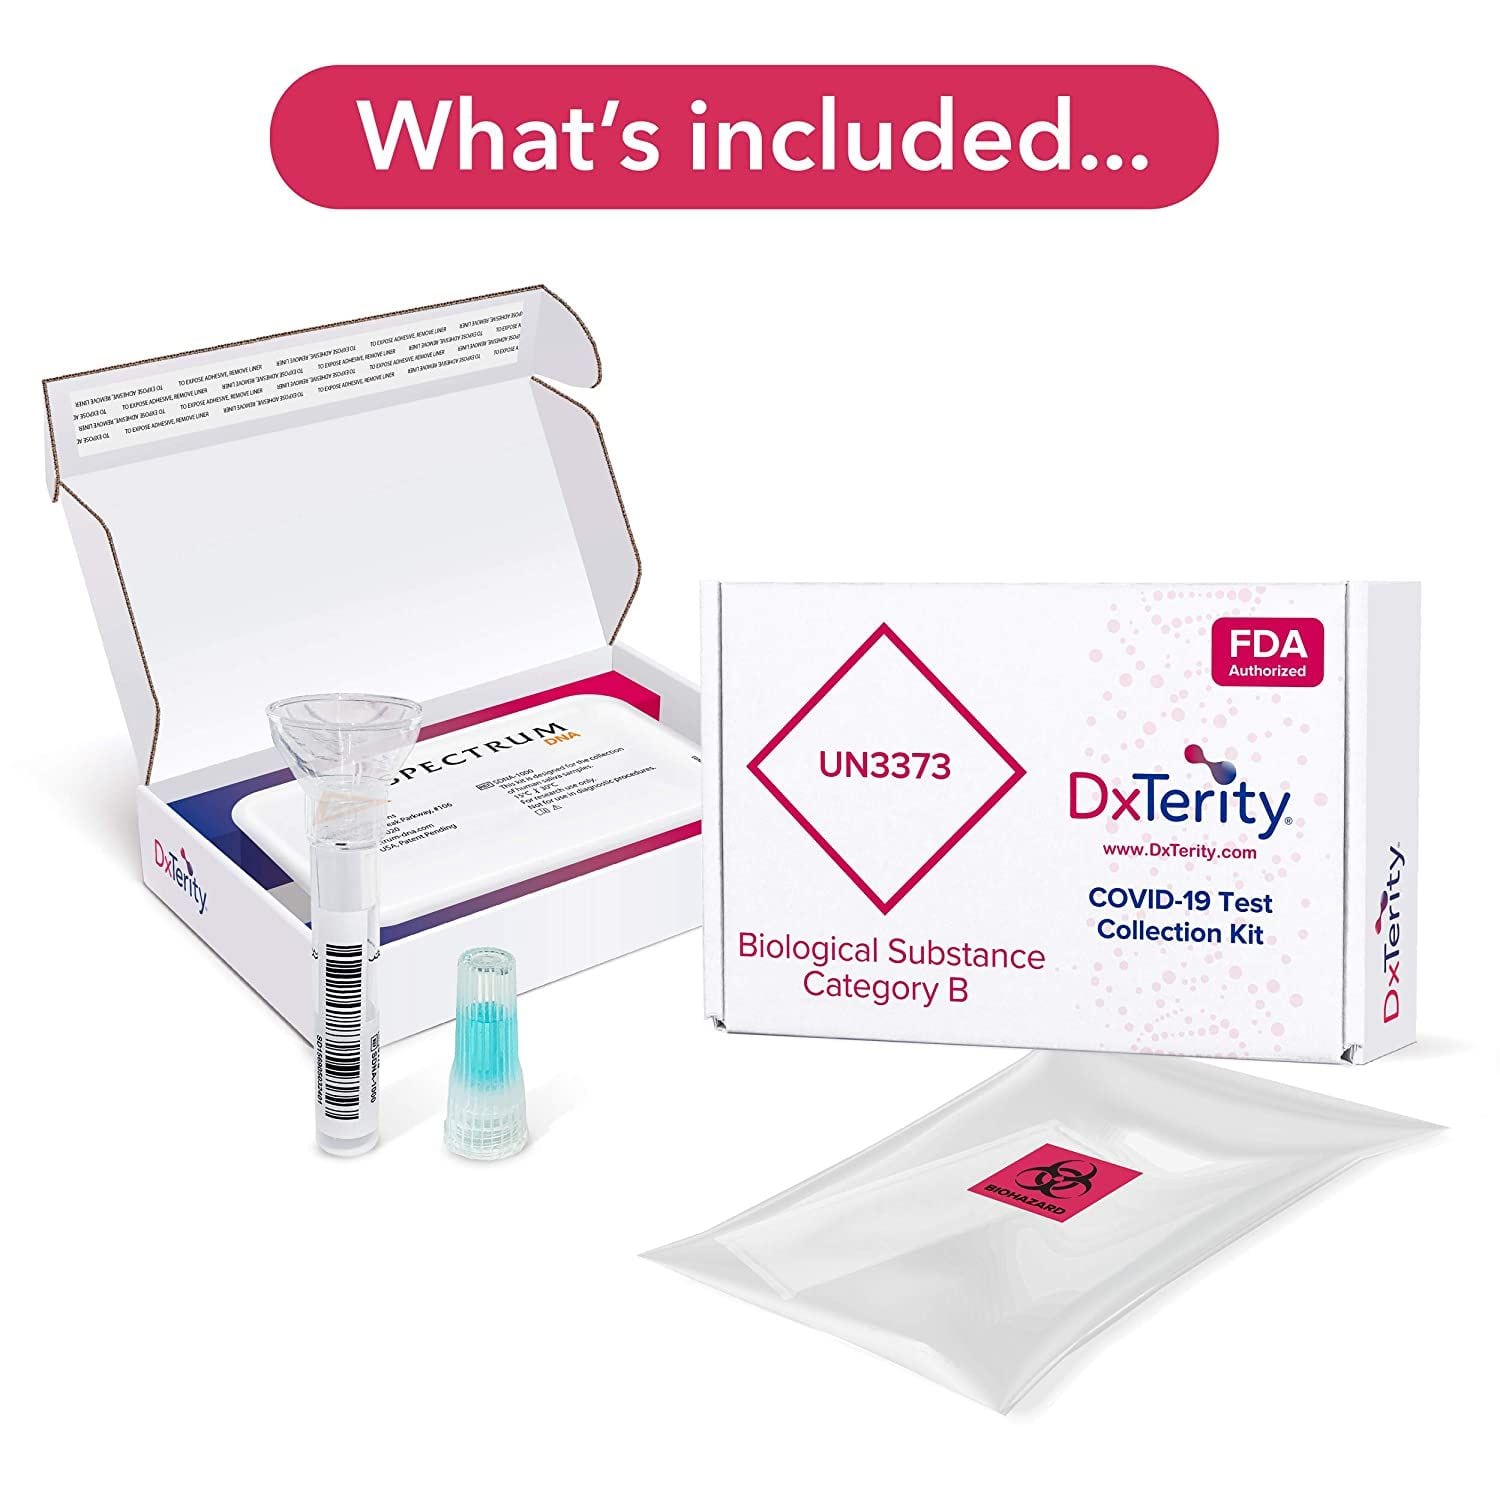 Everything included in DxTerity Diagnostics' COVID-19 test (available online through Amazon).